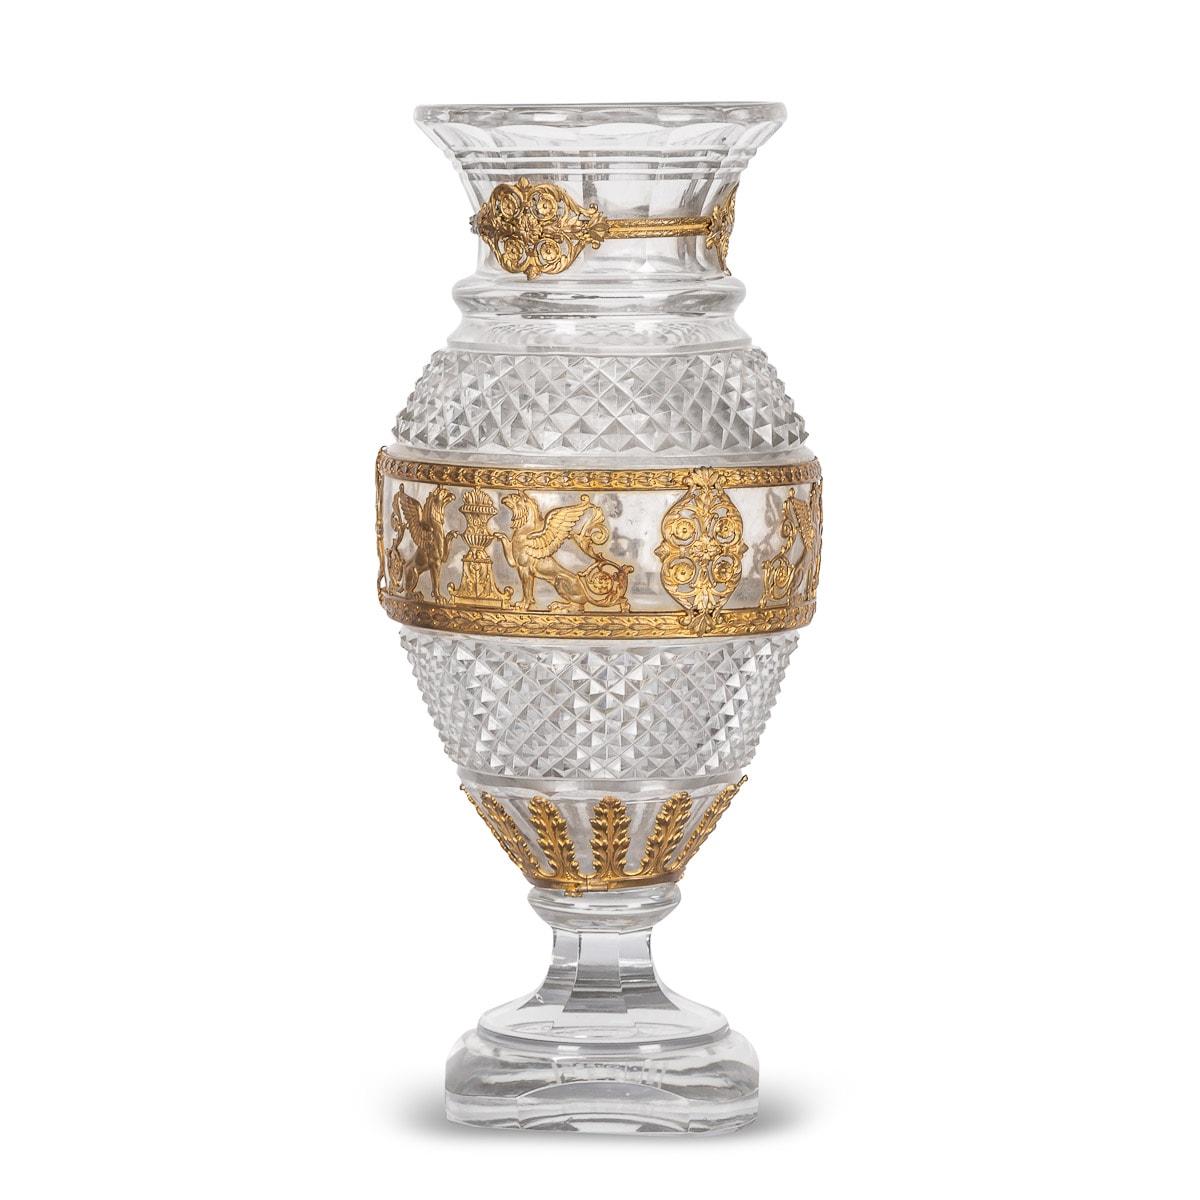 Antique early-20th Century French Baccarat crystal glass & ormolu mounted vase with empire style mounts.

CONDITION
In Great Condition - No Damage.

SIZE
Height: 36cm
Diameter: 17cm.